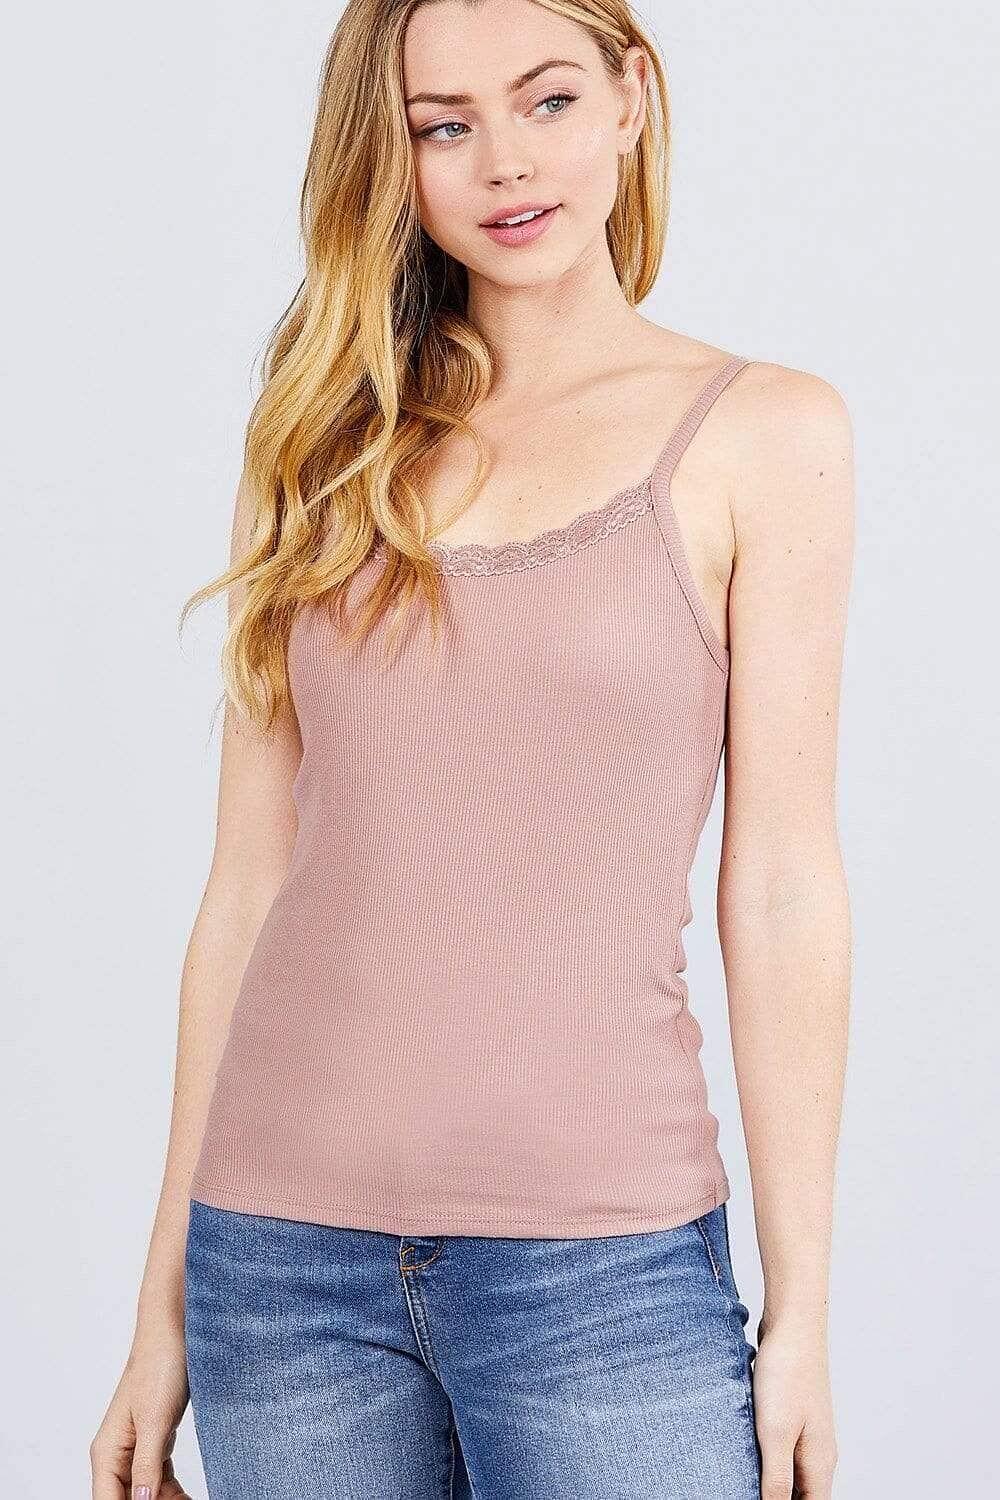 Beige Spaghetti Strap Top - Shopping Therapy, LLC Tank Tops & Camis